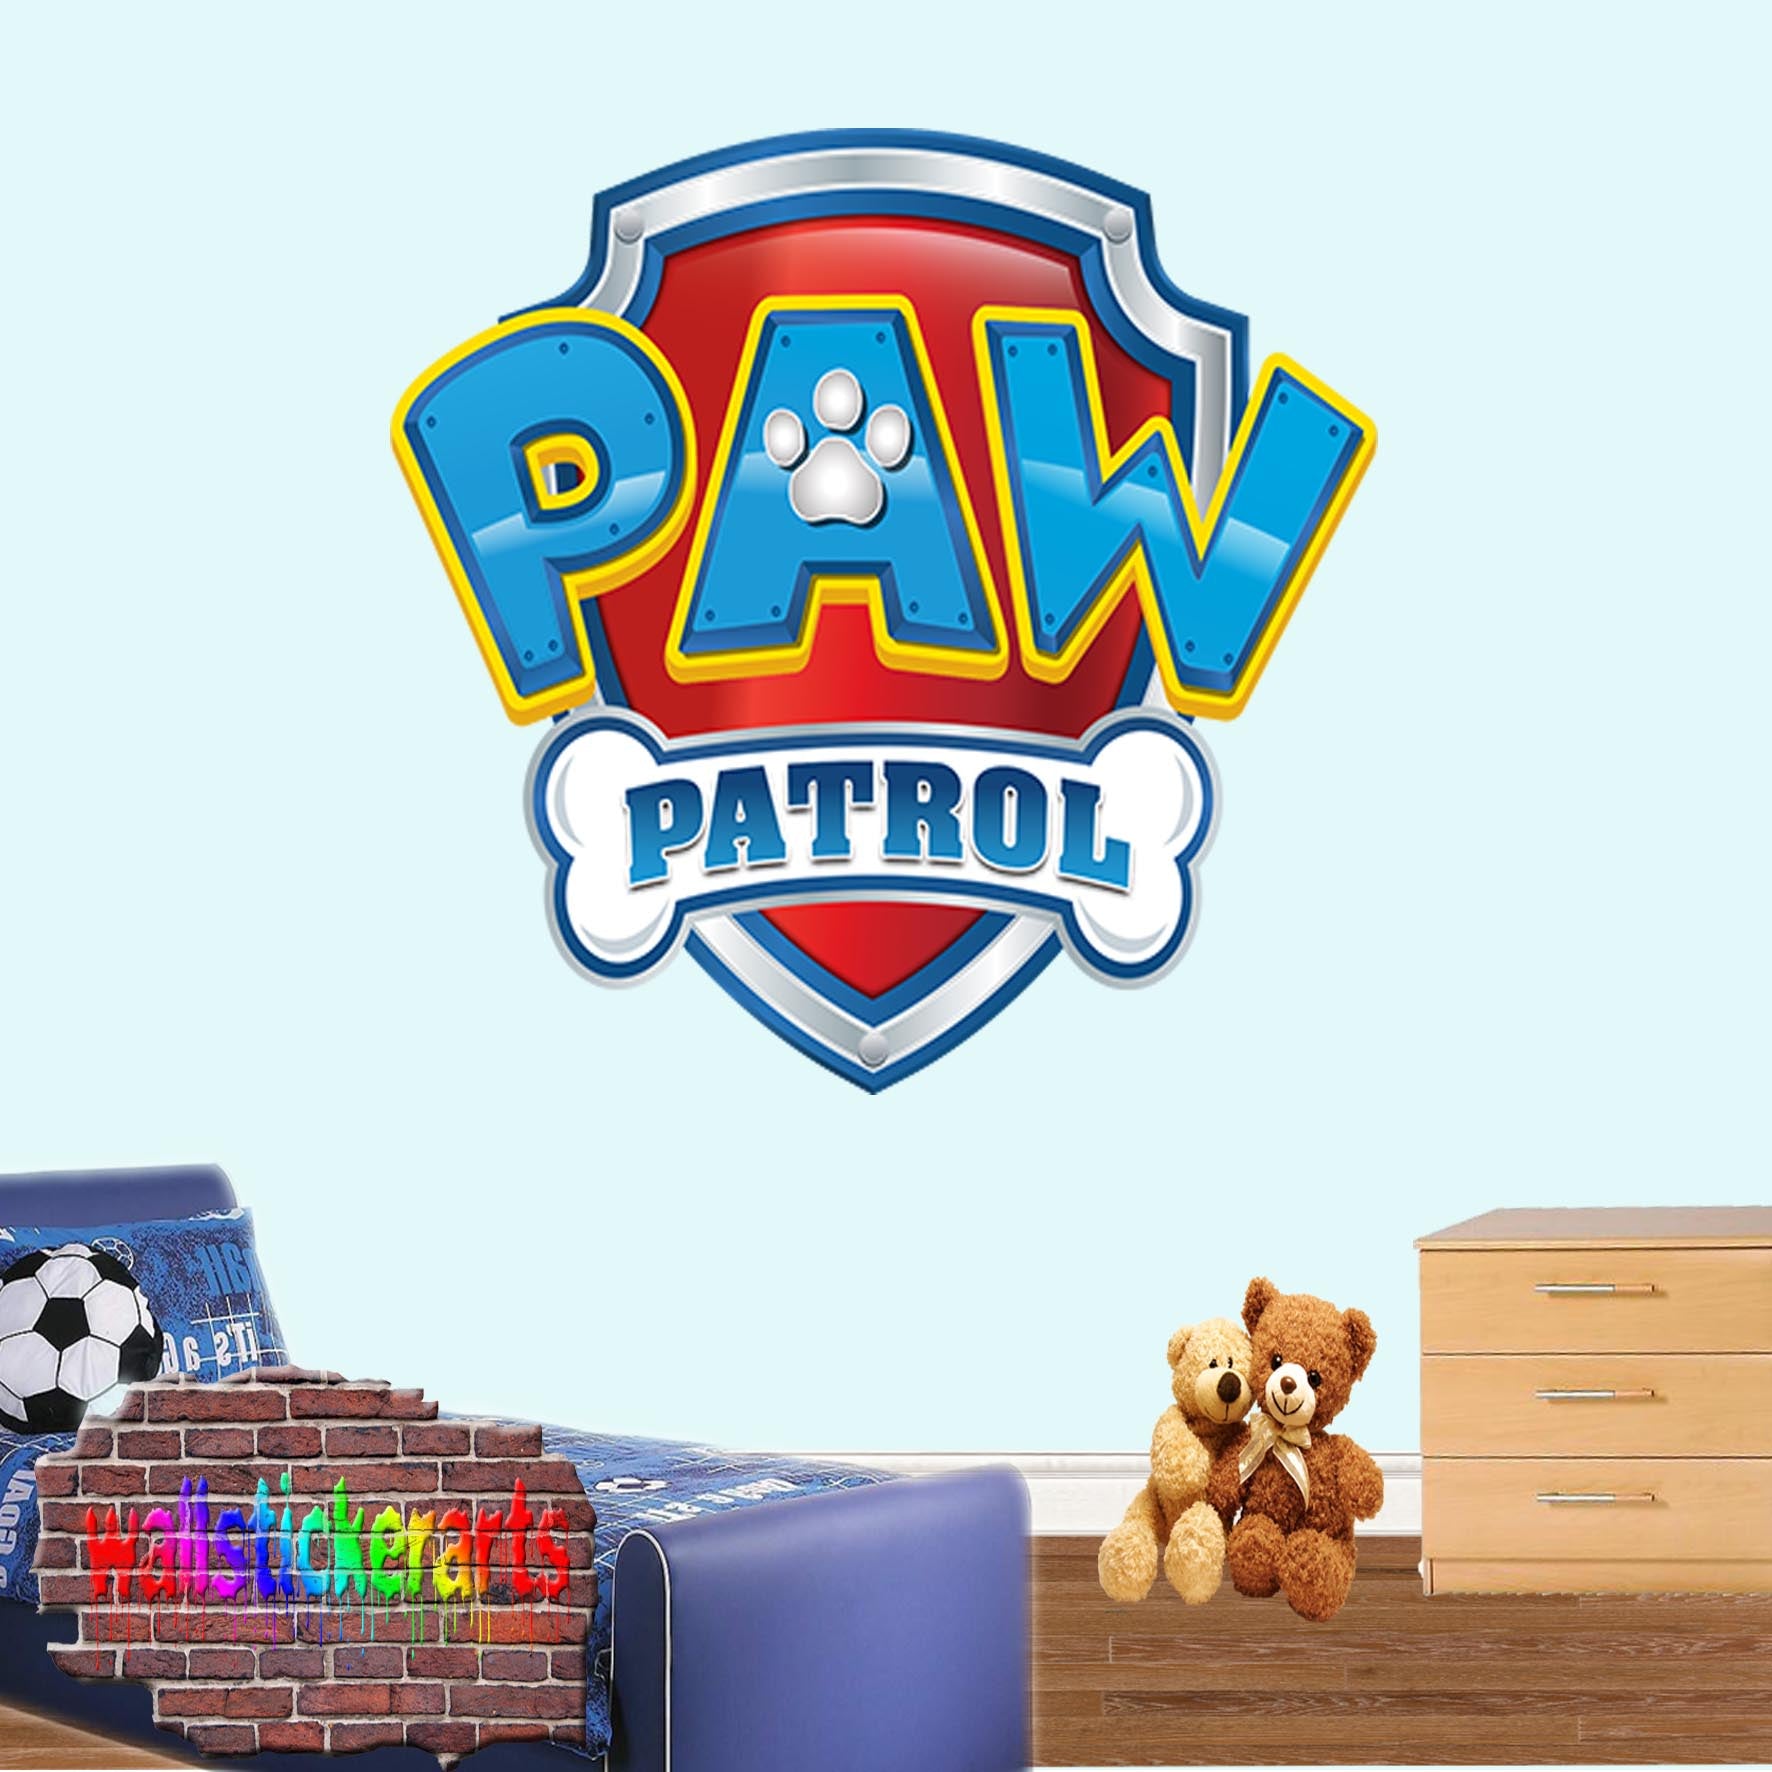 PAW PATROL LOGO WALL STICKER MURAL POSTER MURAL DECAL